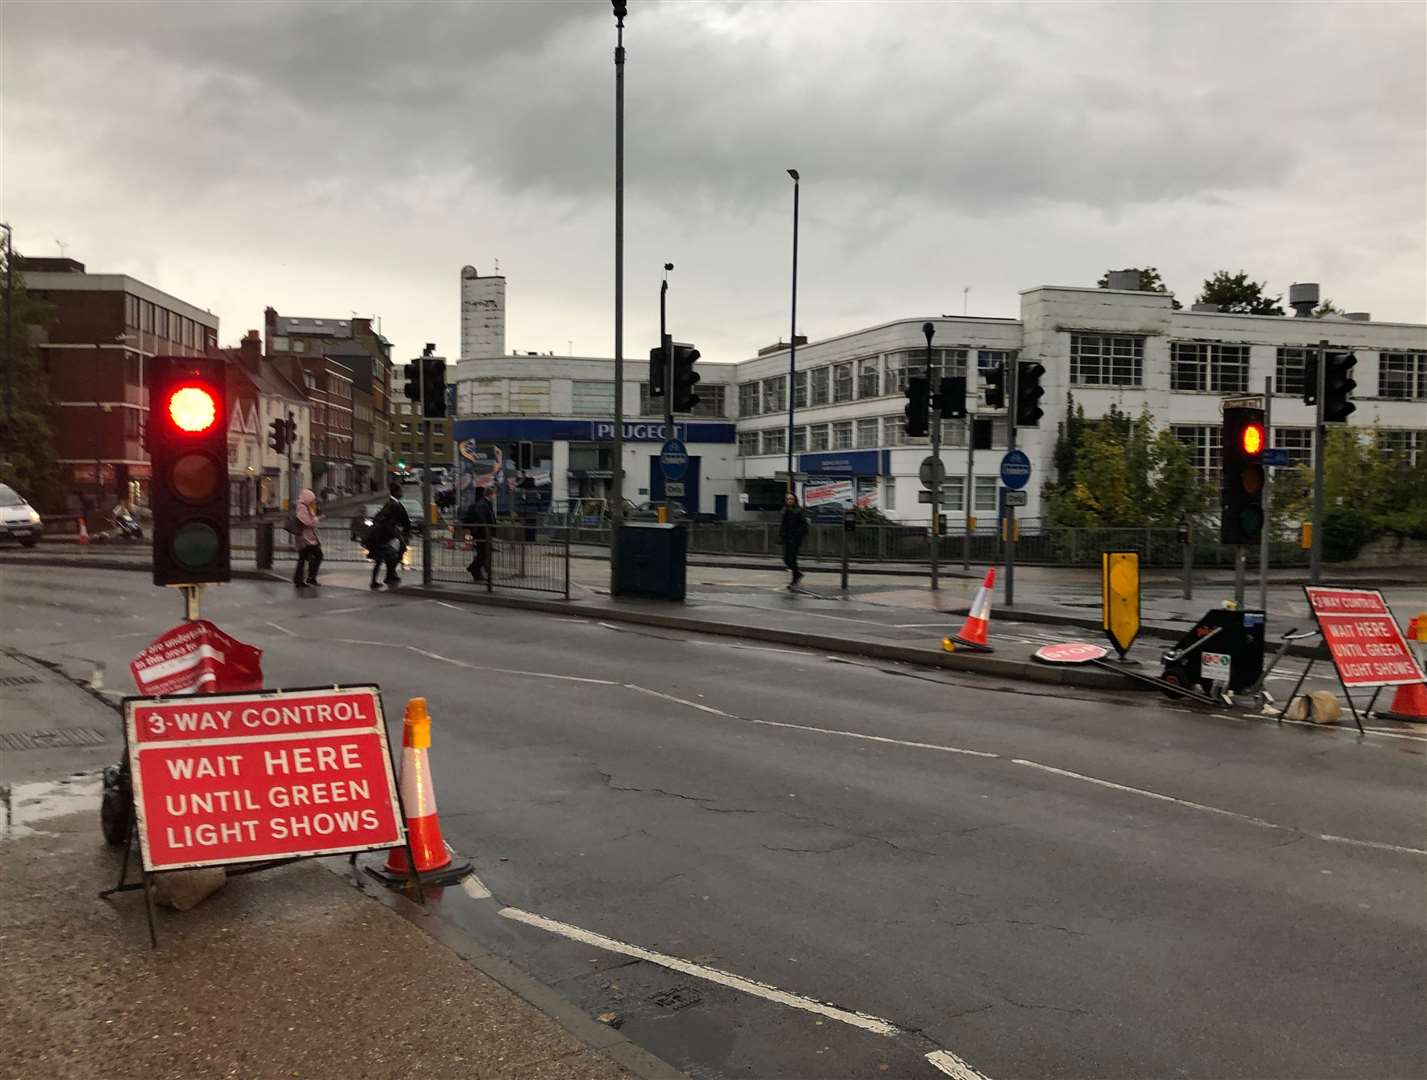 Temporary traffic lights have been put in place in Maidstone